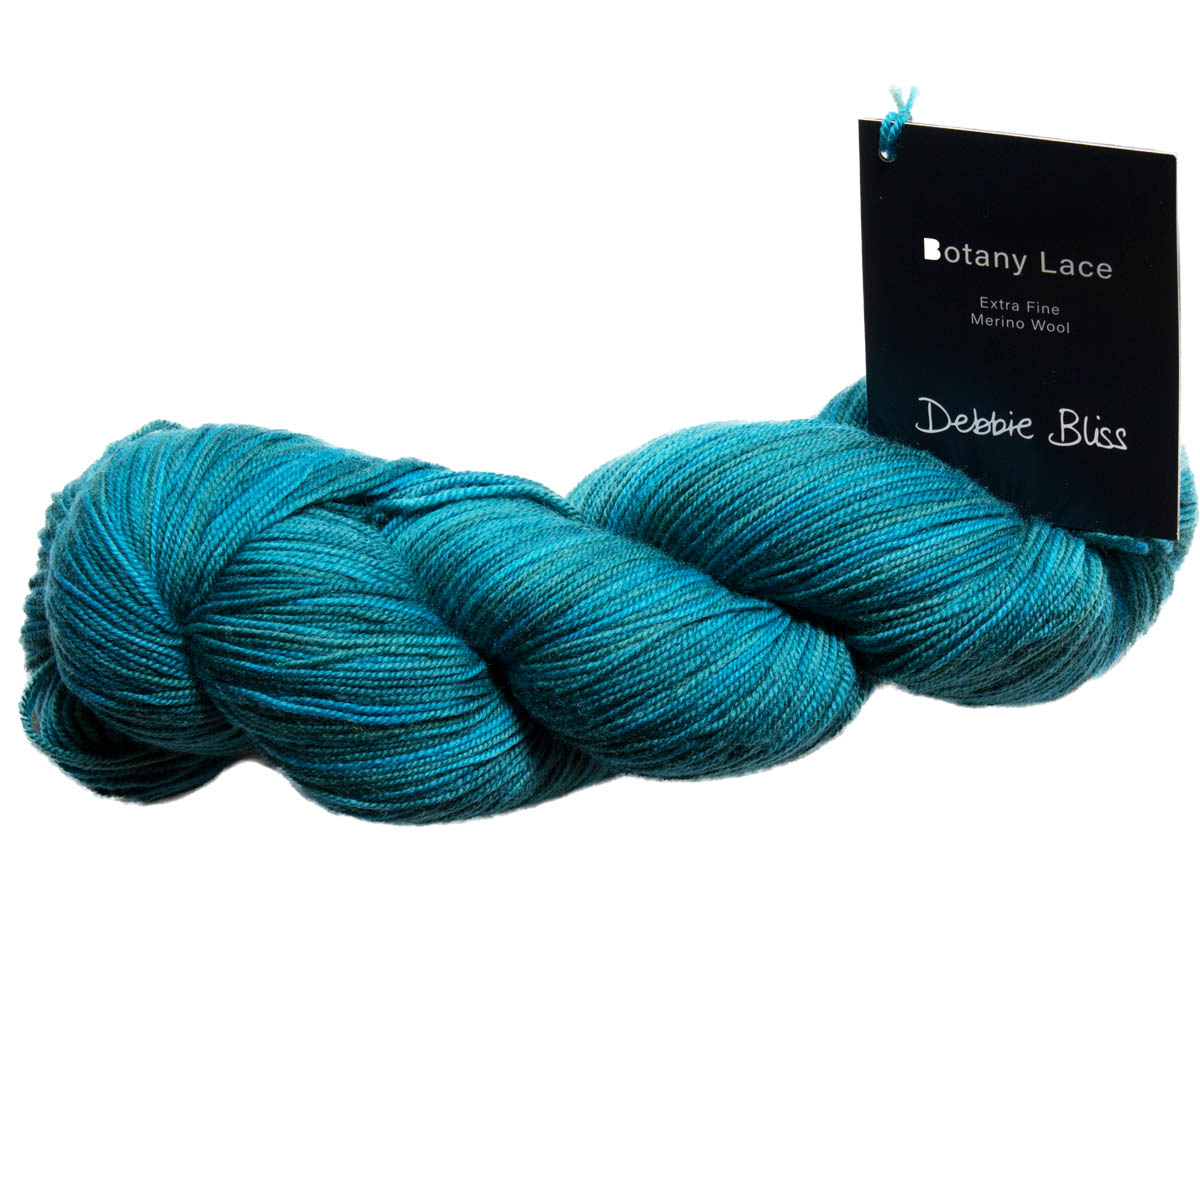 BOTANY LACE - 100% Extra Fine Merino Wool - 4ply/Laceweight 100g + 410m